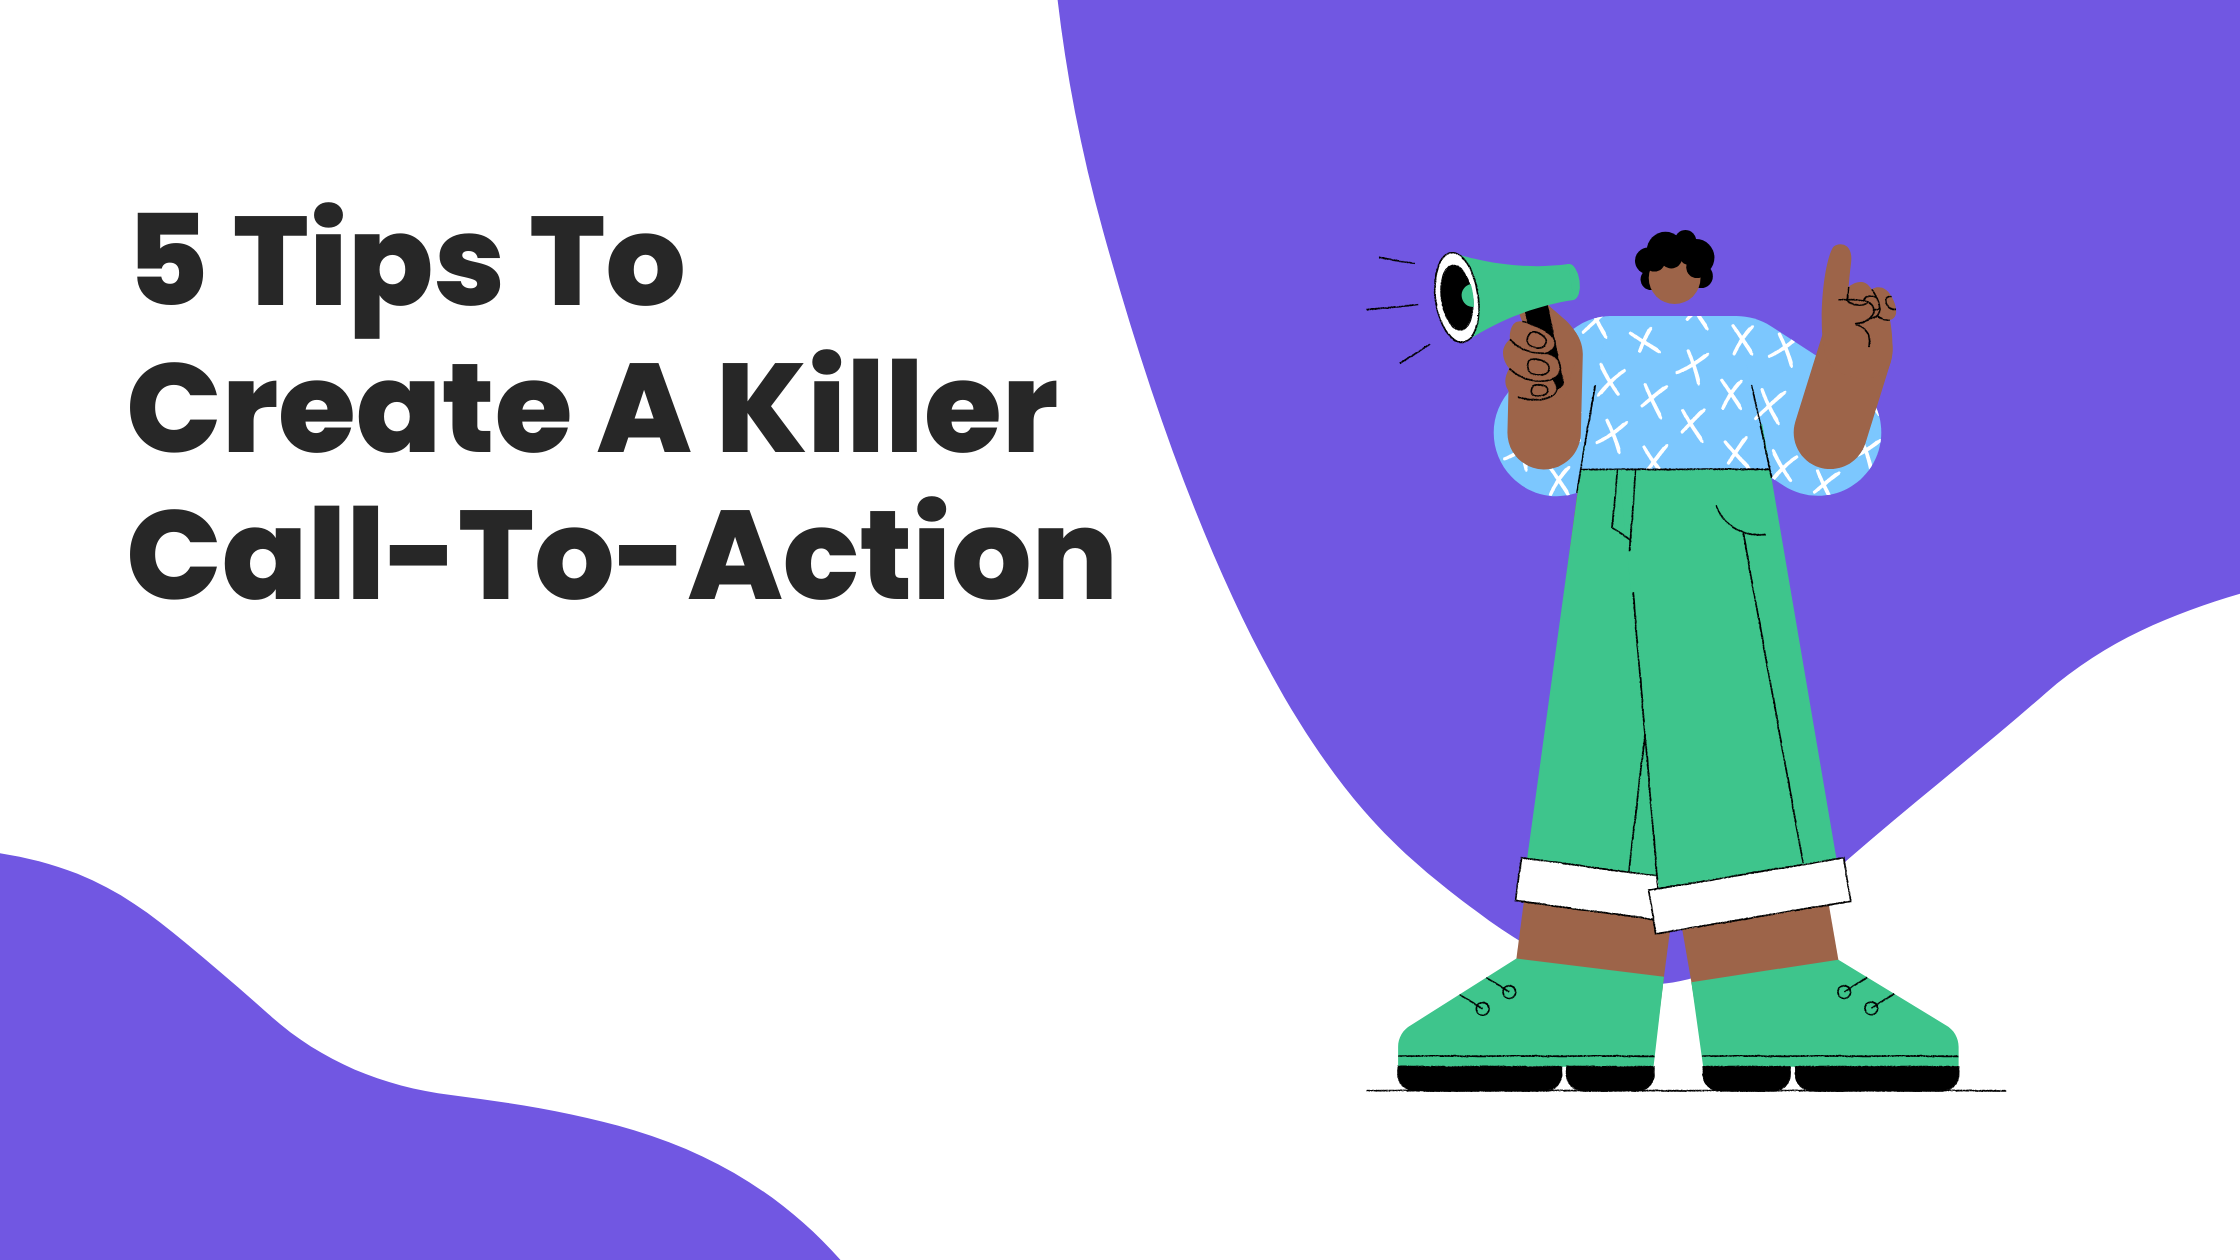 5 Tips To Create A Killer Call-To-Action